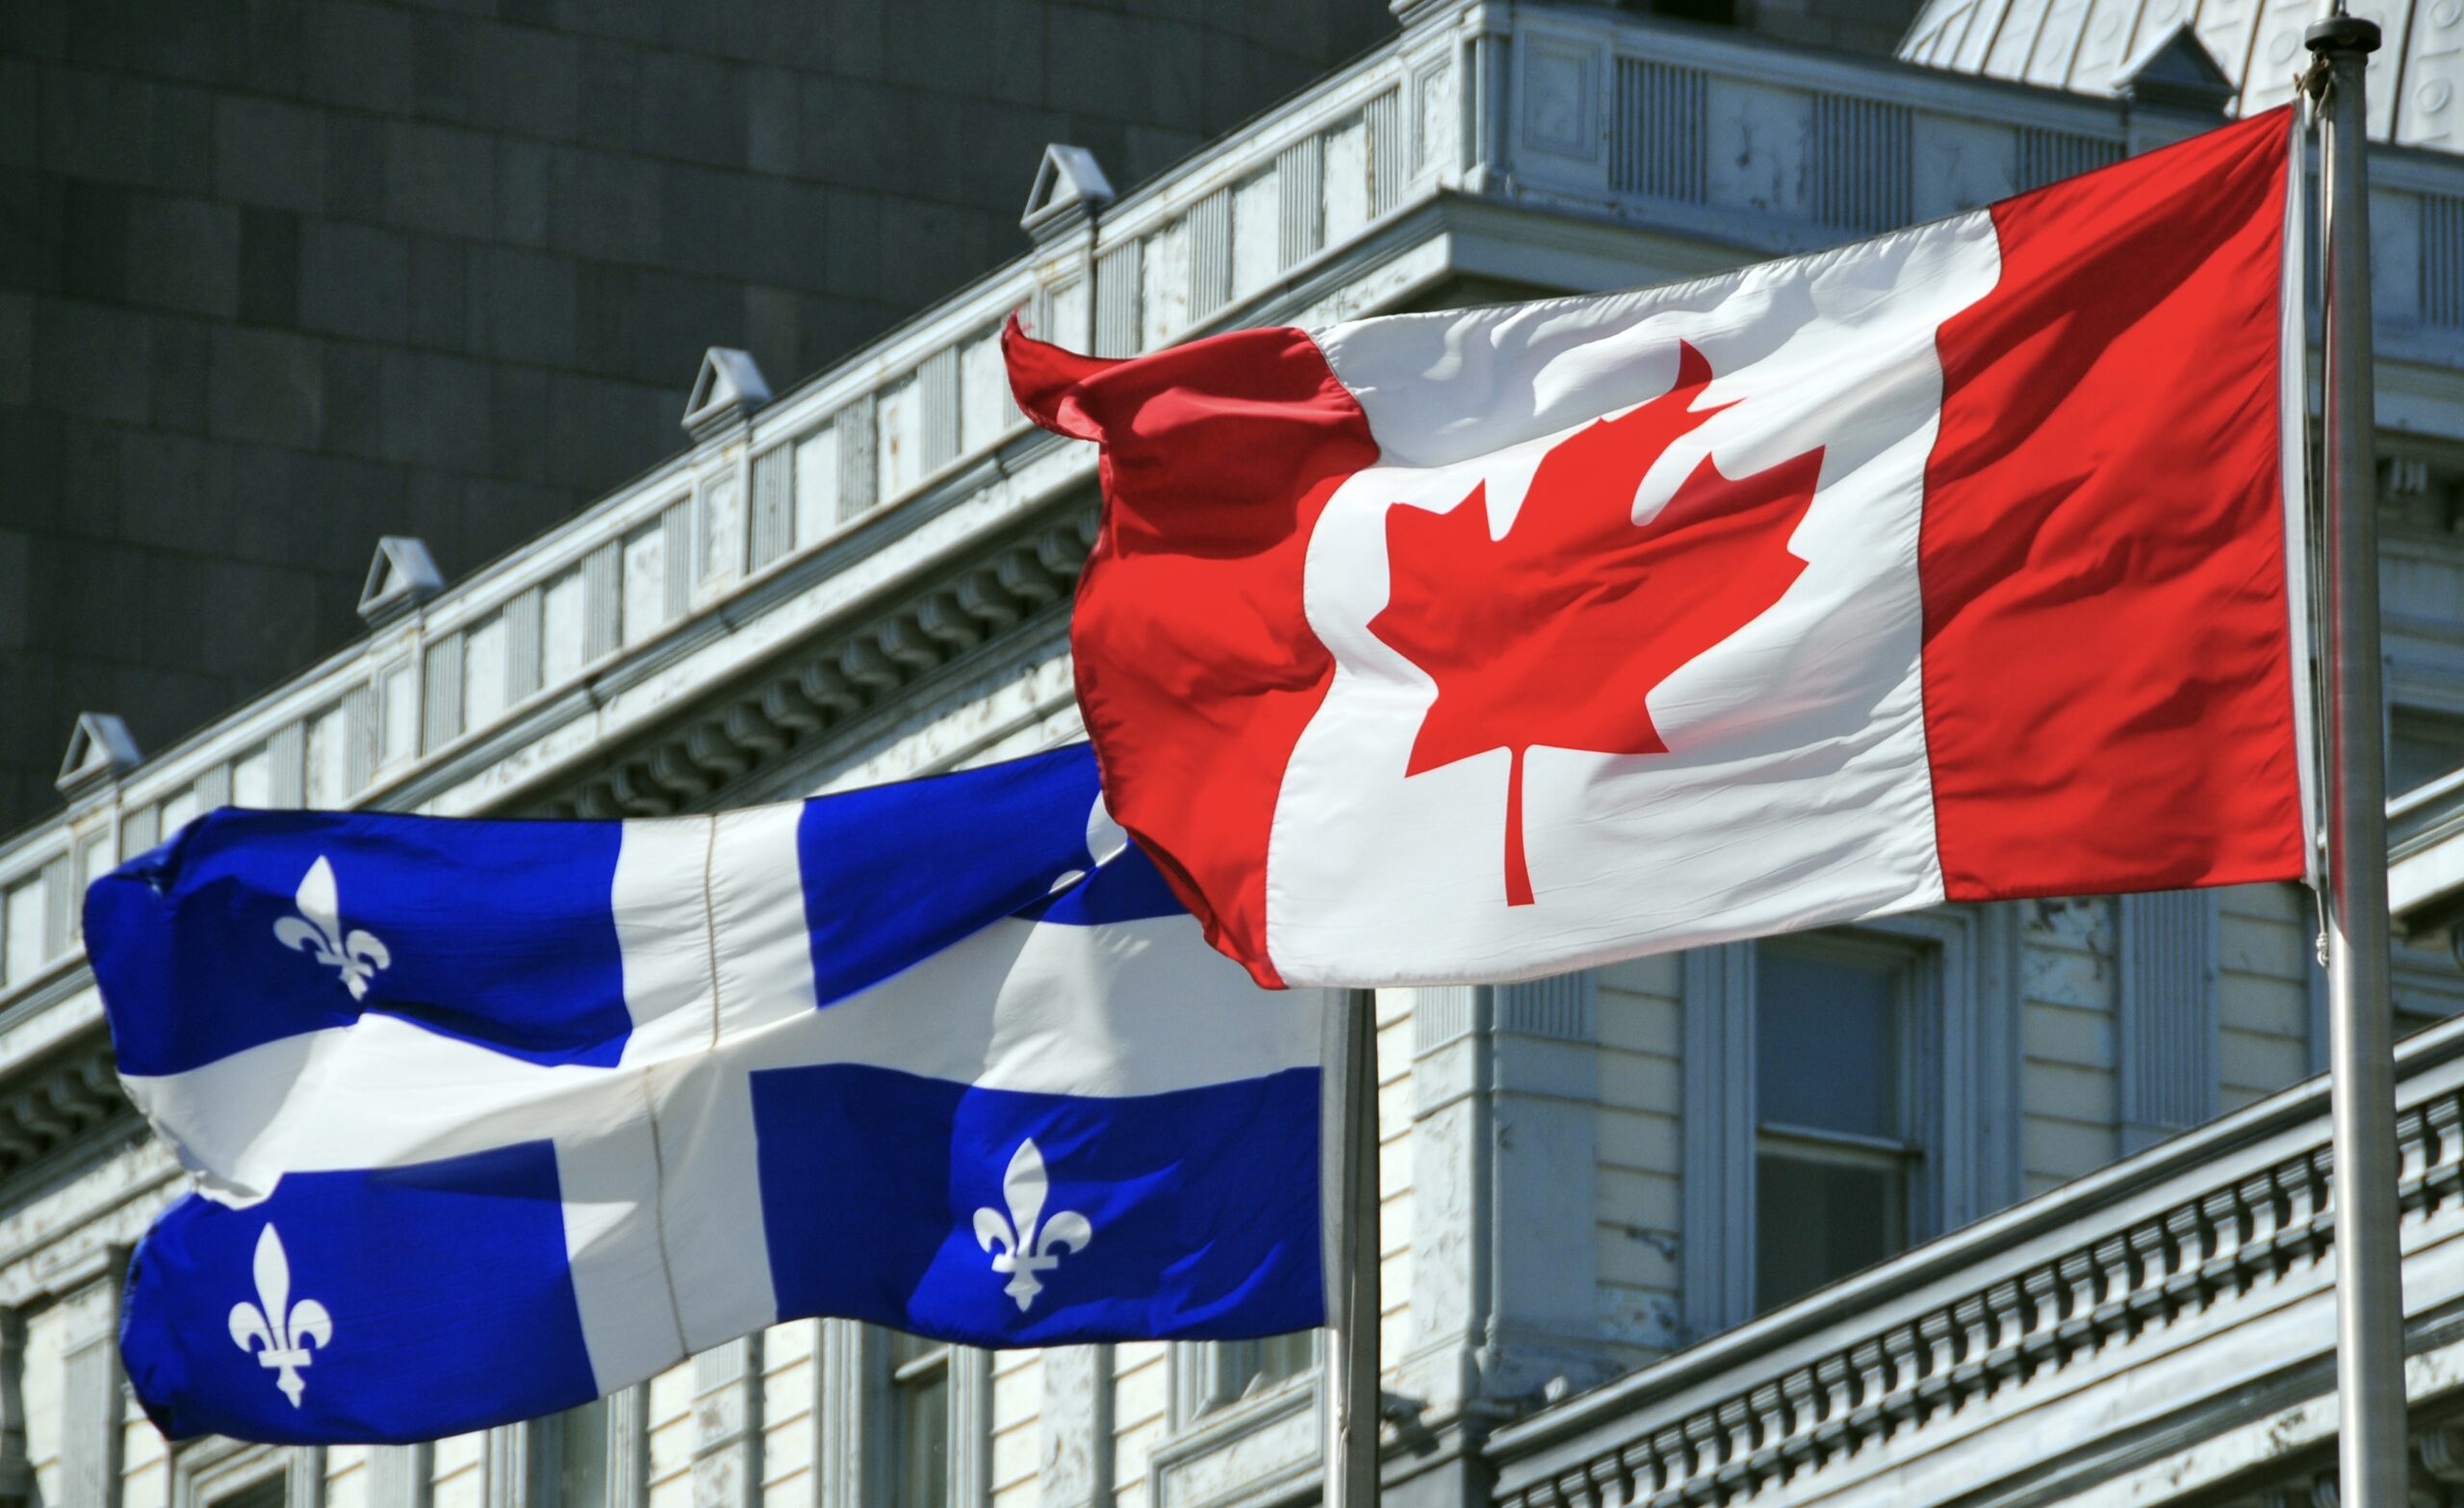 observations from Montreal flag